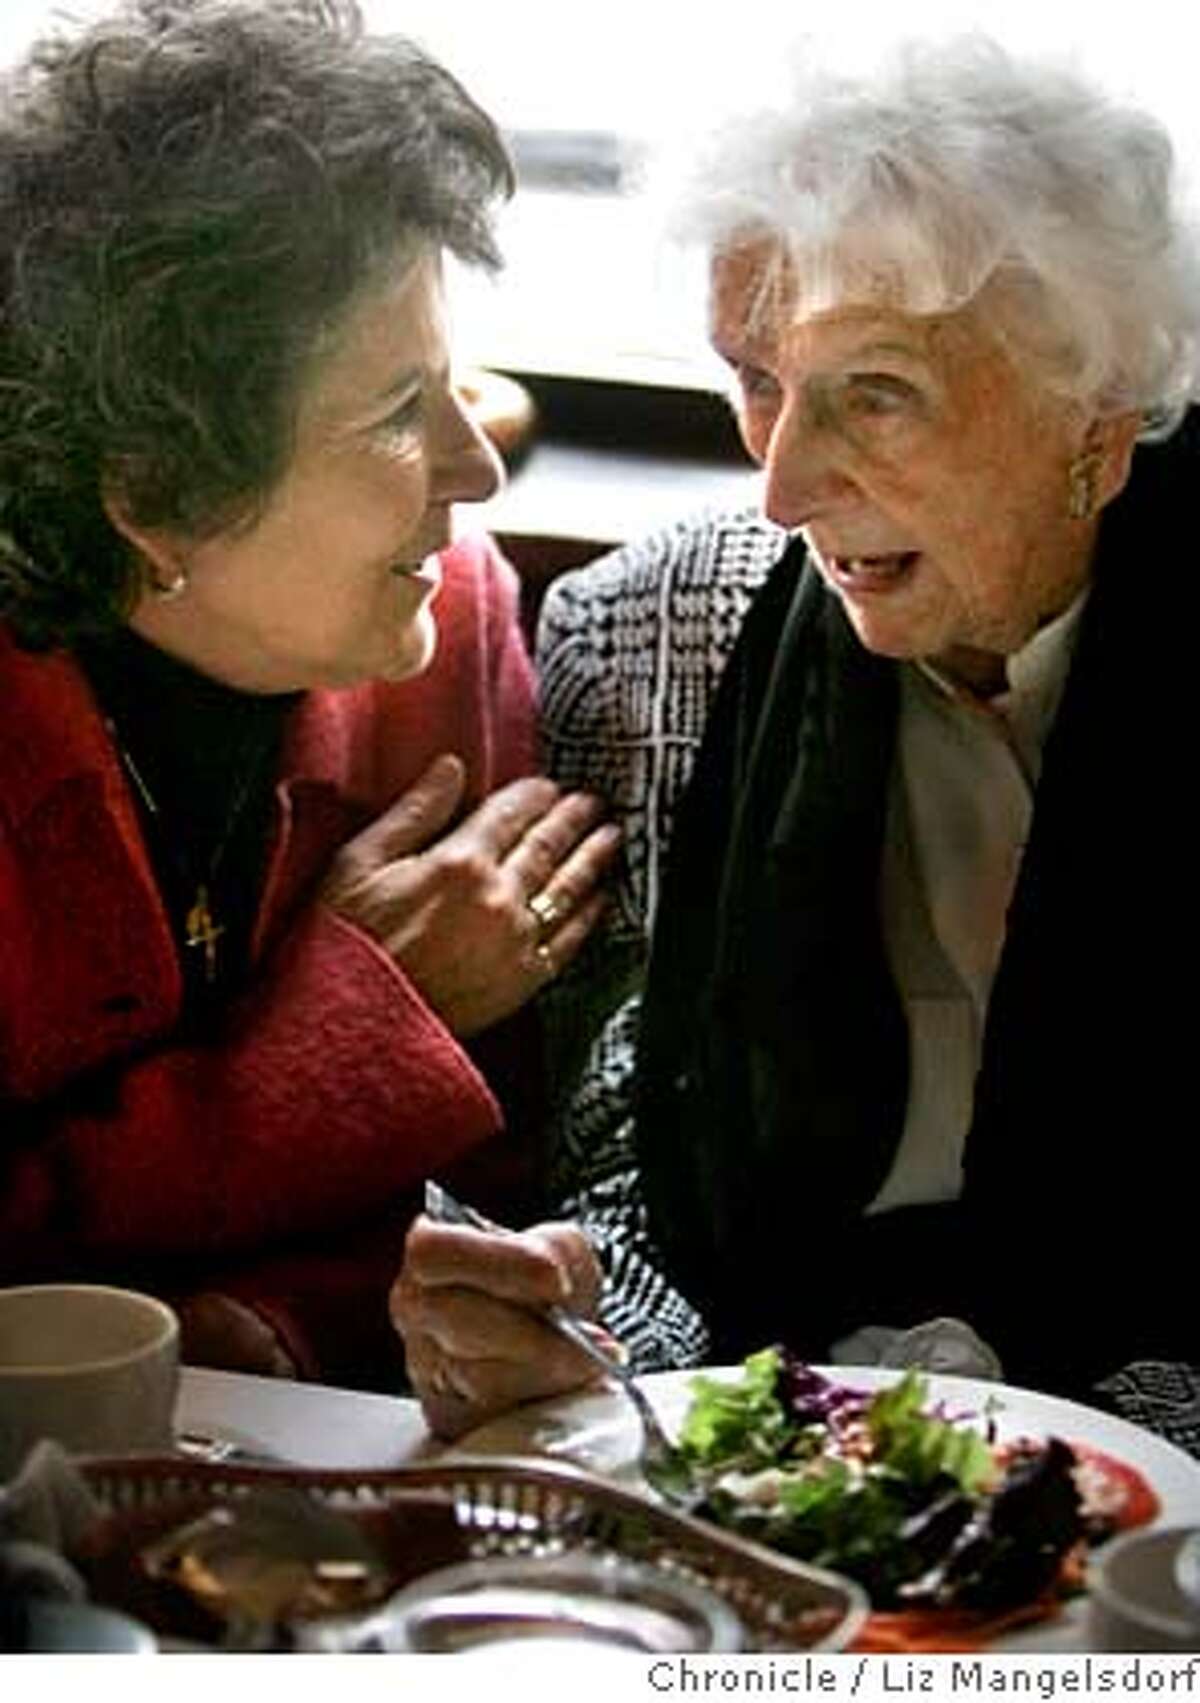 ###Live Caption:quakesurvivors045_lm.JPG Event on 4/4/06 in San Francisco. During her lunch 108-year-old Chrissie Martinstein, right, talks with her caregiver Bridget Ridley. Six 1906 quake survivors gathered at John's Grill in SF to talk about their memories (mainly with the media that swamped them). Liz Mangelsdorf /###Caption History:quakesurvivors045_lm.JPG Event on 4/4/06 in San Francisco. During her lunch 108-year-old Chrissie Martinstein, right, talks with her caregiver Bridget Ridley. Six 1906 quake survivors gathered at John's Grill in SF to talk about their memories (mainly with the media that swamped them). Liz Mangelsdorf /###Notes:###Special Instructions:MANDATORY CREDIT FOR PHOTOG AND SF CHRONICLE/NO SALES-MAGS OUT